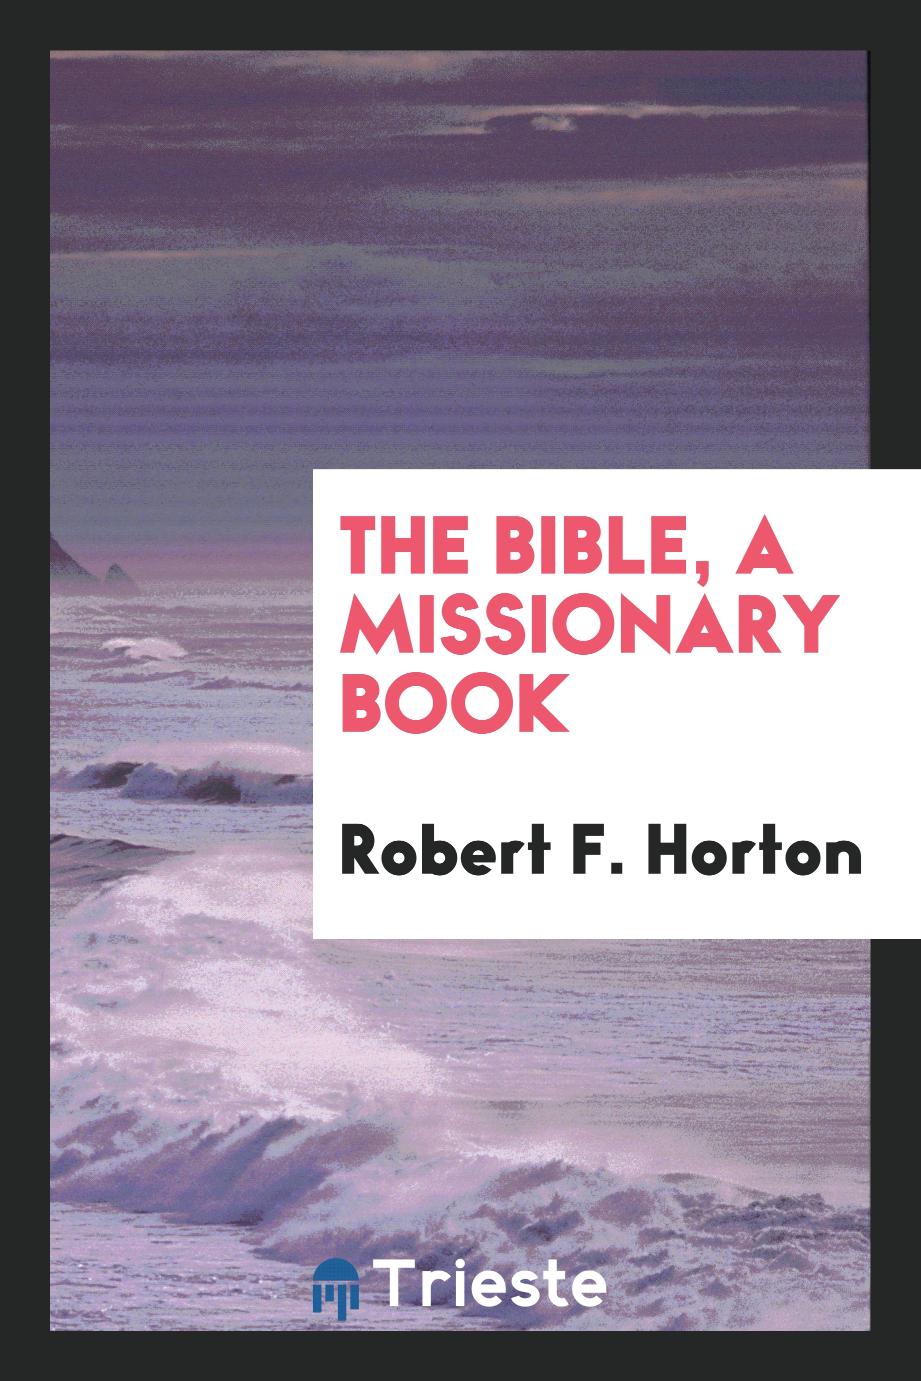 The Bible, a Missionary Book